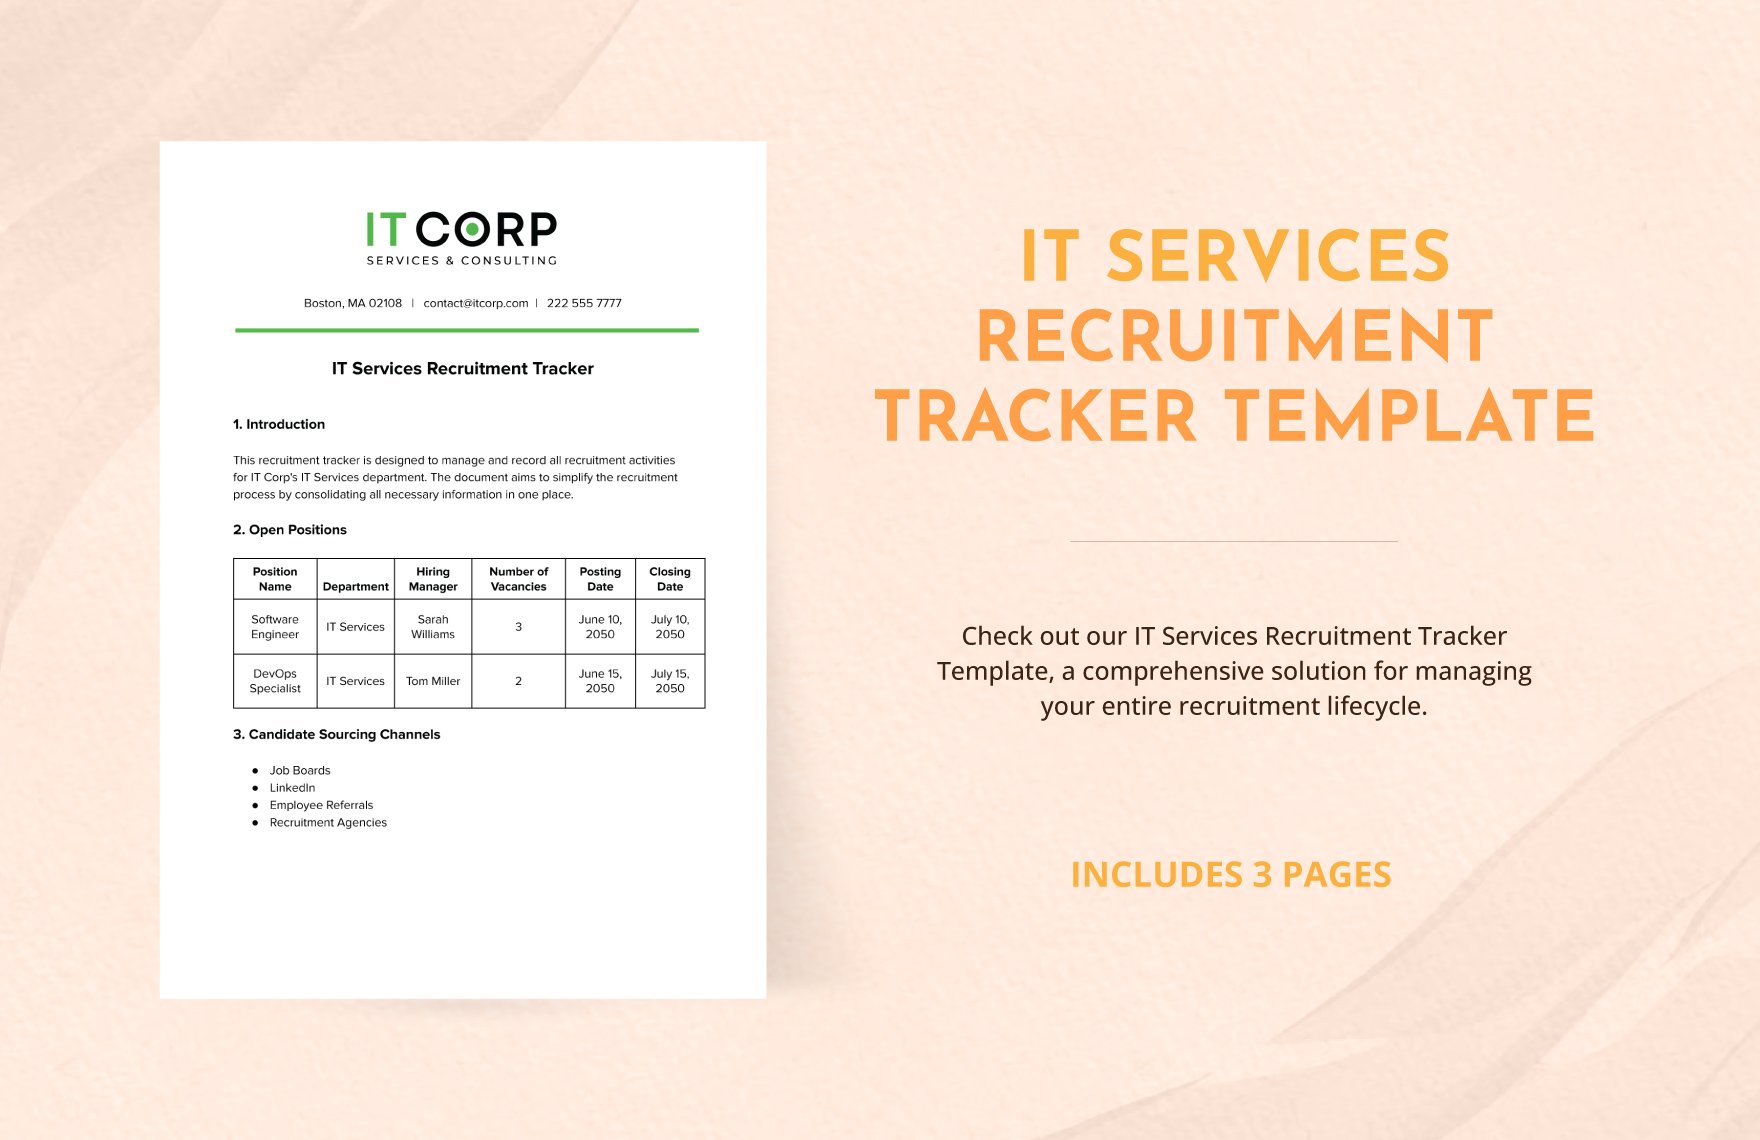 IT Services Recruitment Tracker Template